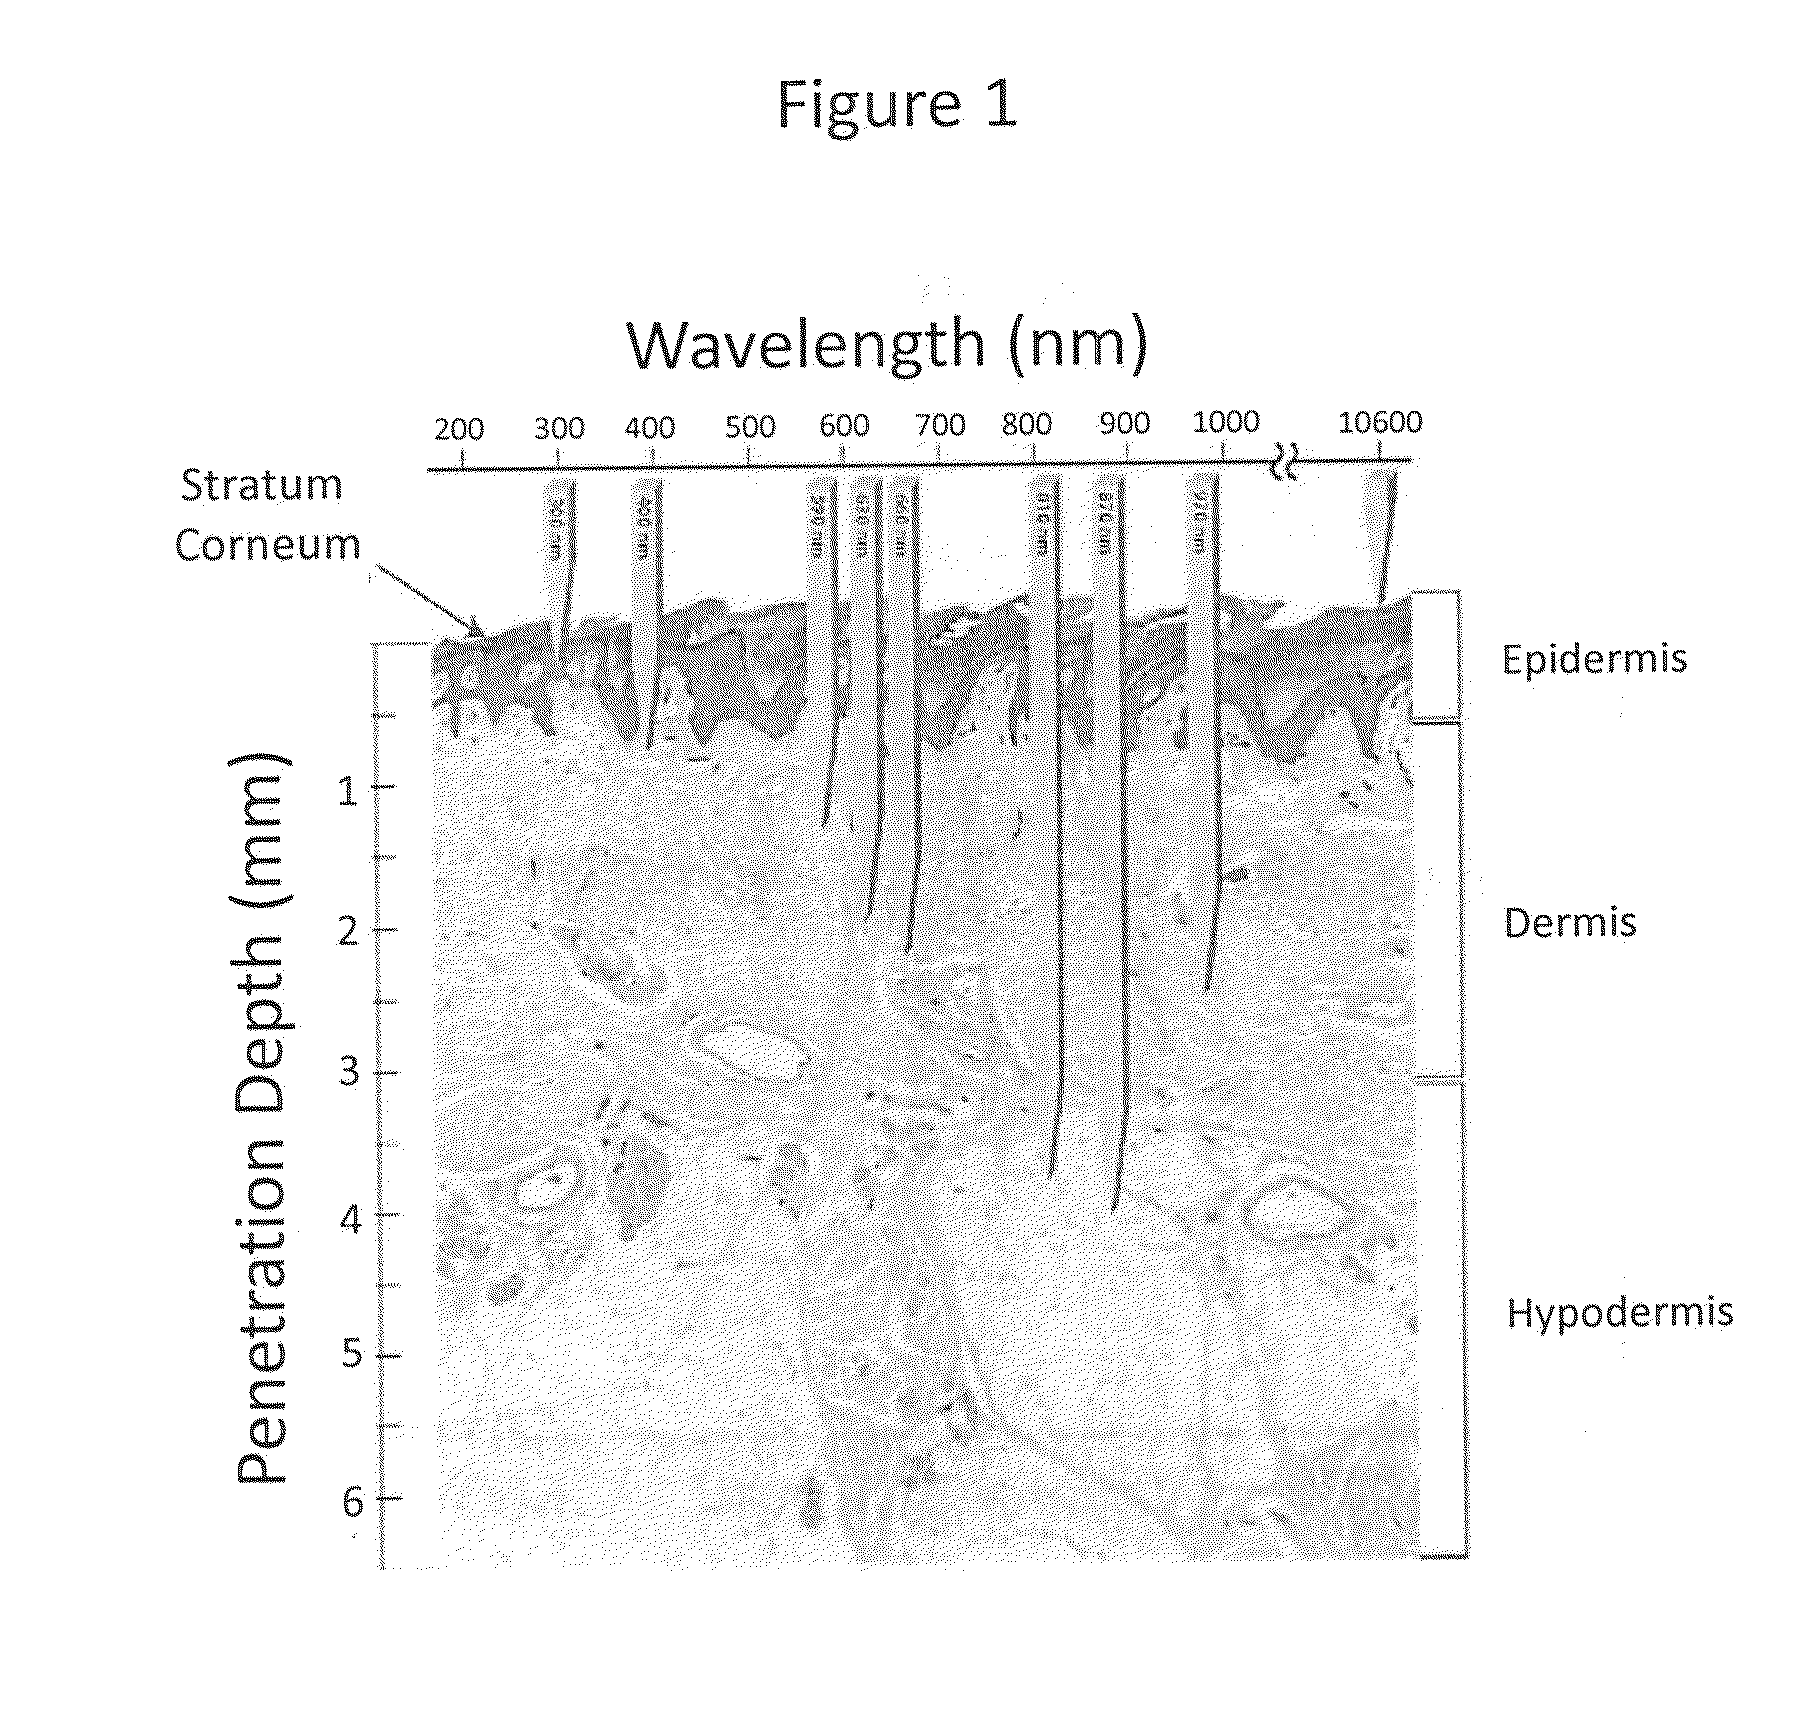 Biophotonic compositions and methods for providing biophotonic treatment